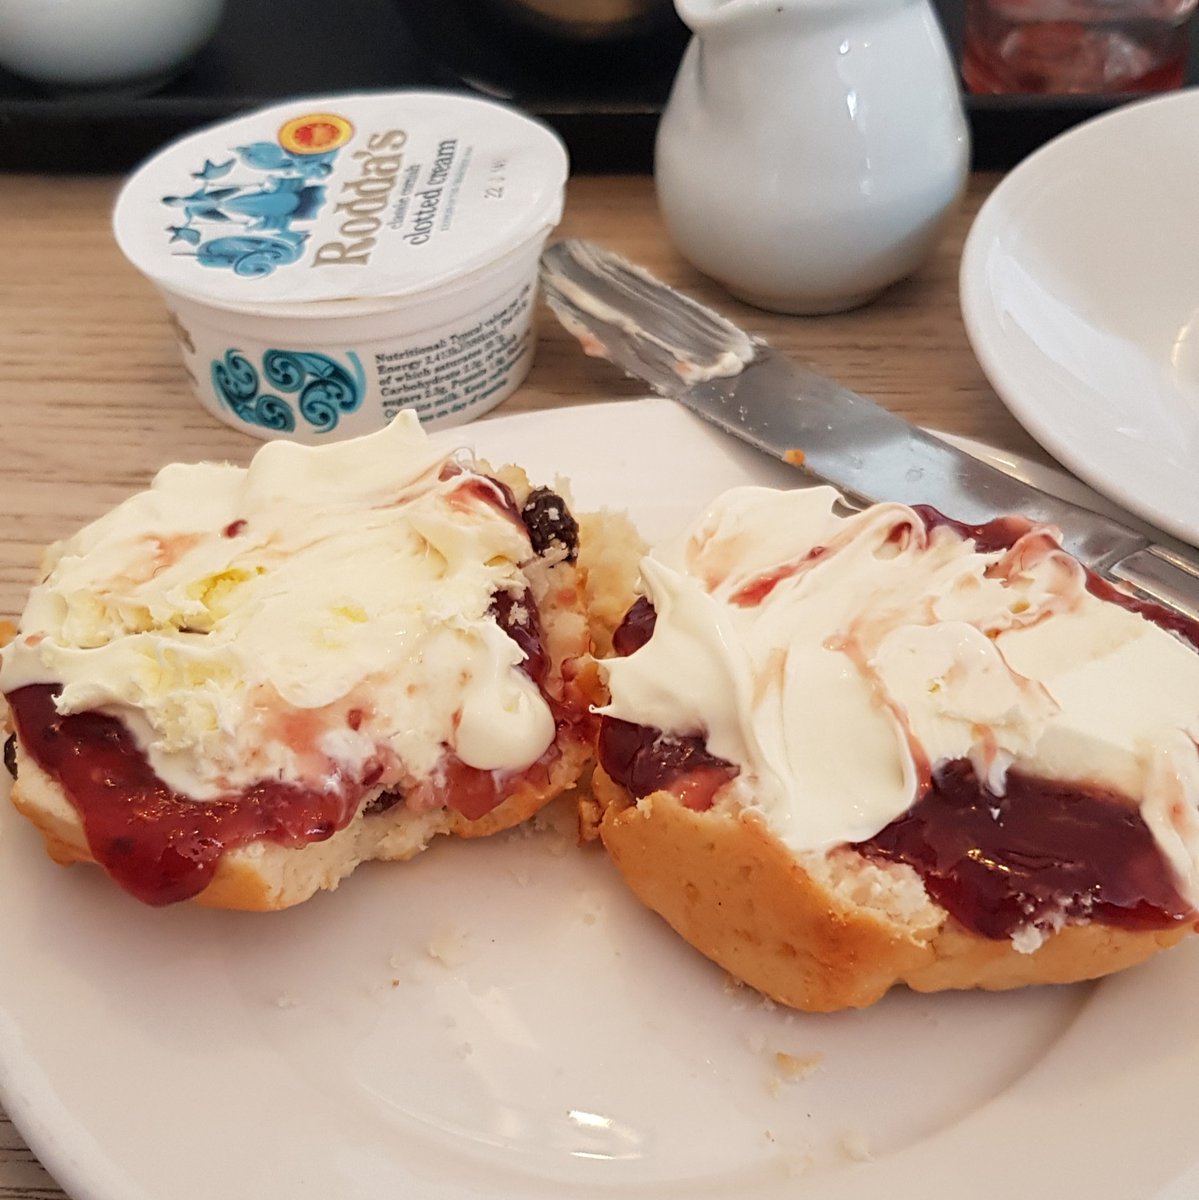 Thank you @LanhydrockNT for a gluten free cream tea. Very rare to find, but always appreciated. @nt_scones